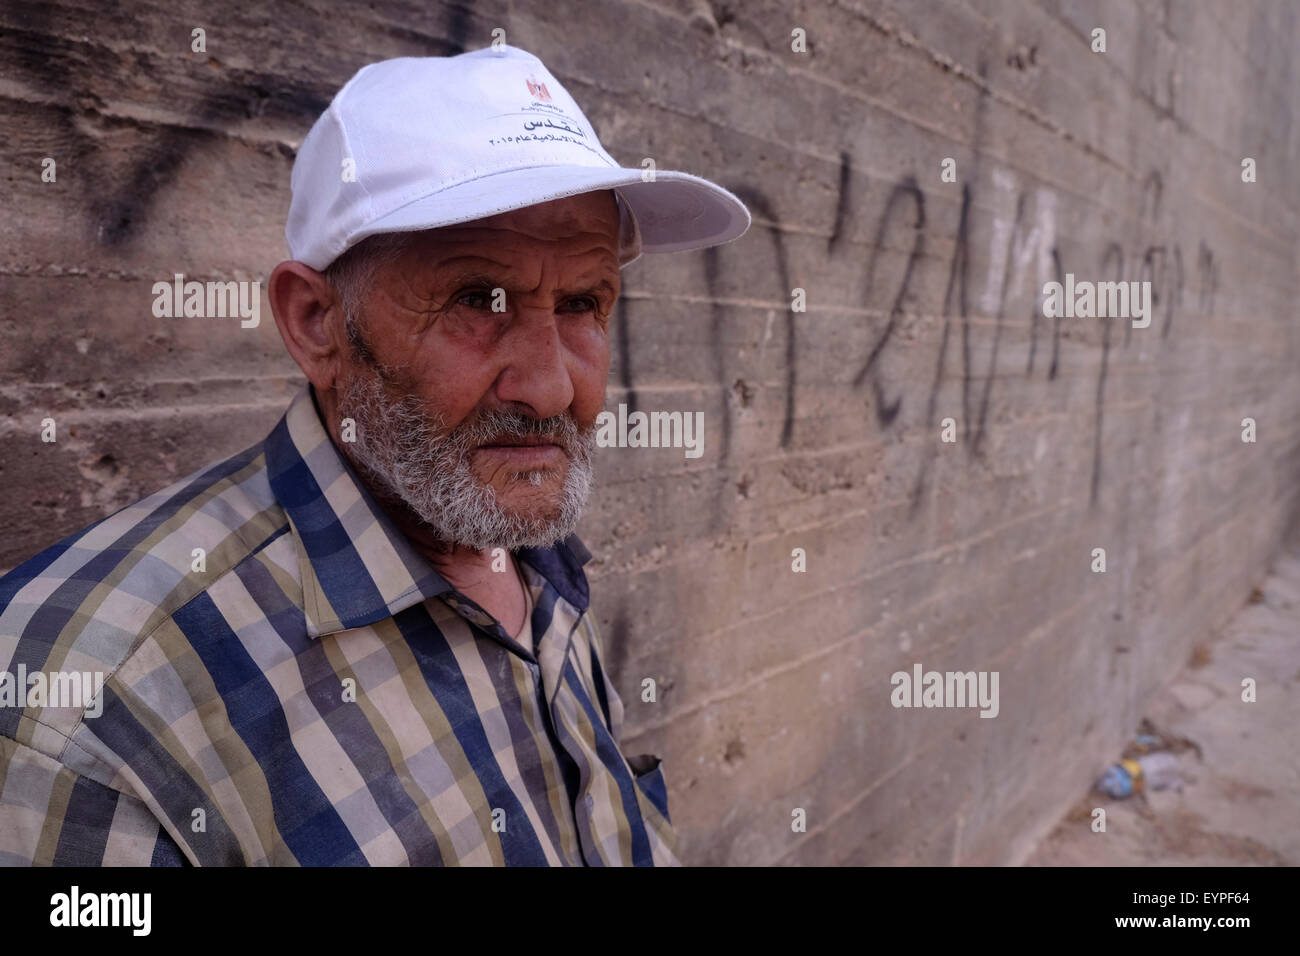 An elderly Palestinian stands next to a Hebrew phrase ‘Long live the king messiah’ spray-painted on the wall in front of Dawabsha family in Duma, a Palestinian Arab town in the West Bank which was firebombed on 31 of July by masked attackers in apparent price tag attack killing 18-month-old Ali Saad Dawabsha and critically injuring his parents and 4-year-old brother  02 August 2015. “Price tag” is used to refer to acts of political violence carried out by right-wing Israelis protesting Israeli government policy regarding the settlements and the Palestinians. Stock Photo